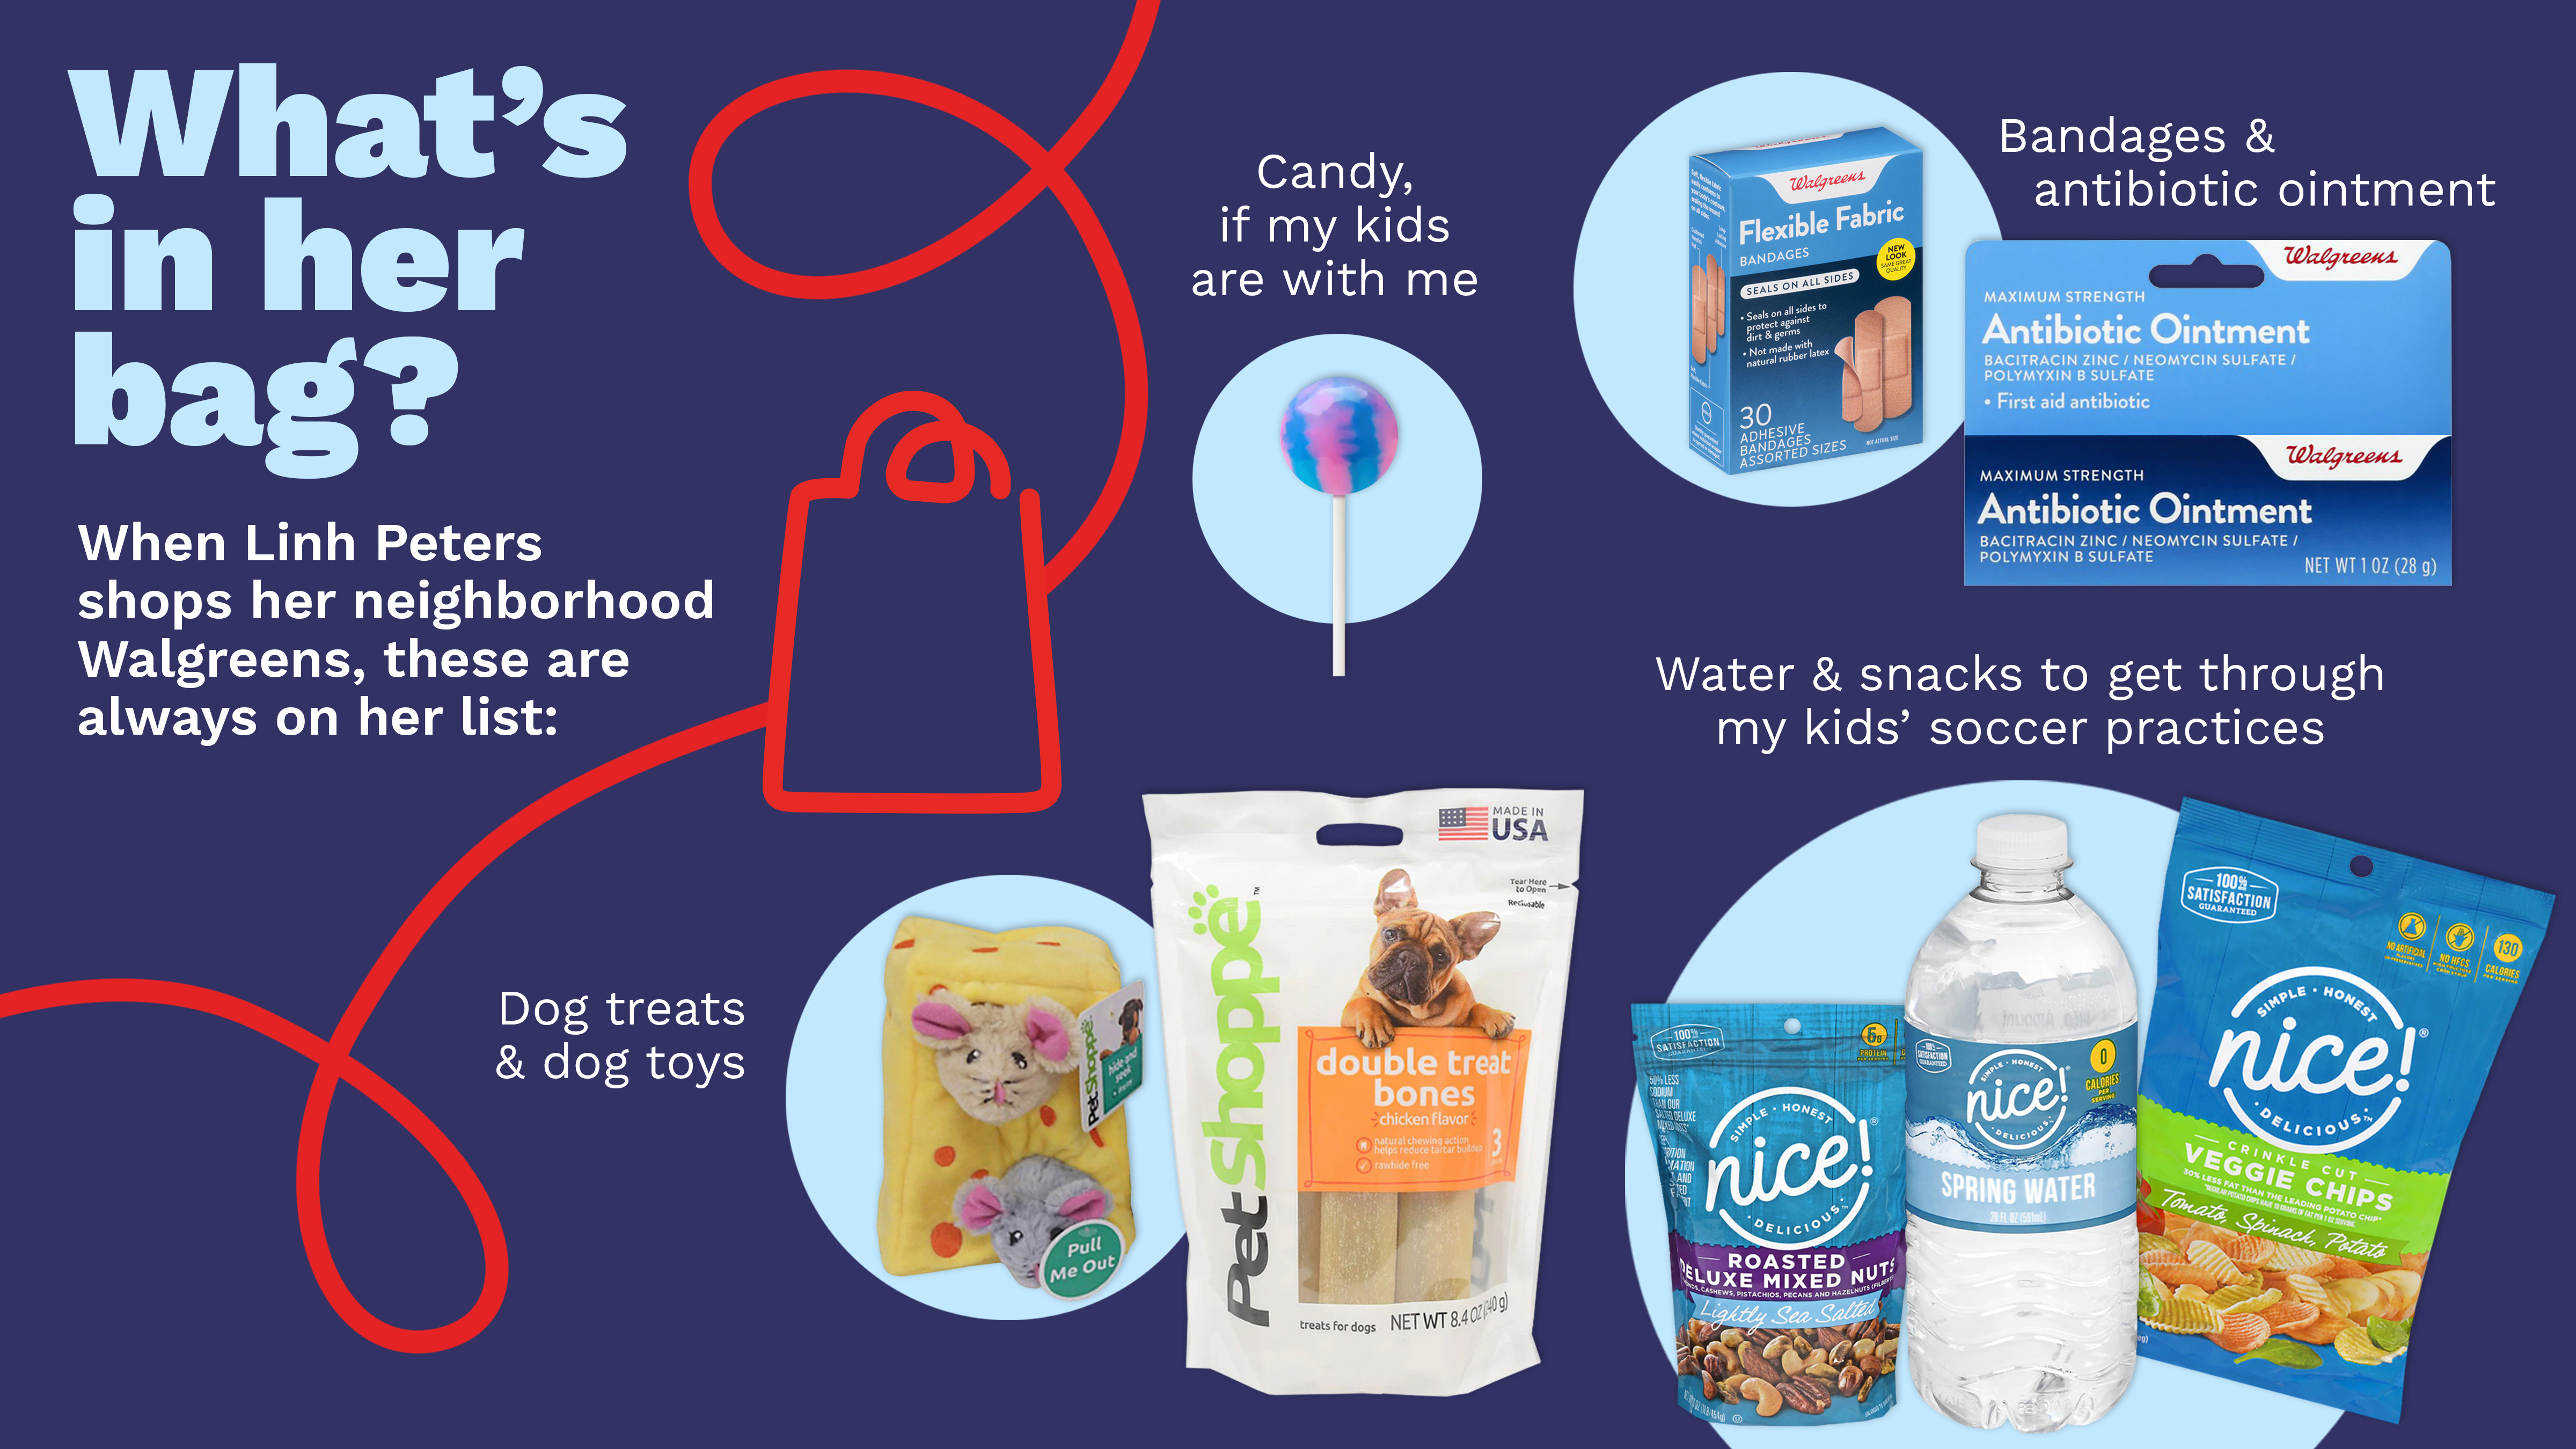 Linh Peters' favorite items to shop at Walgreens